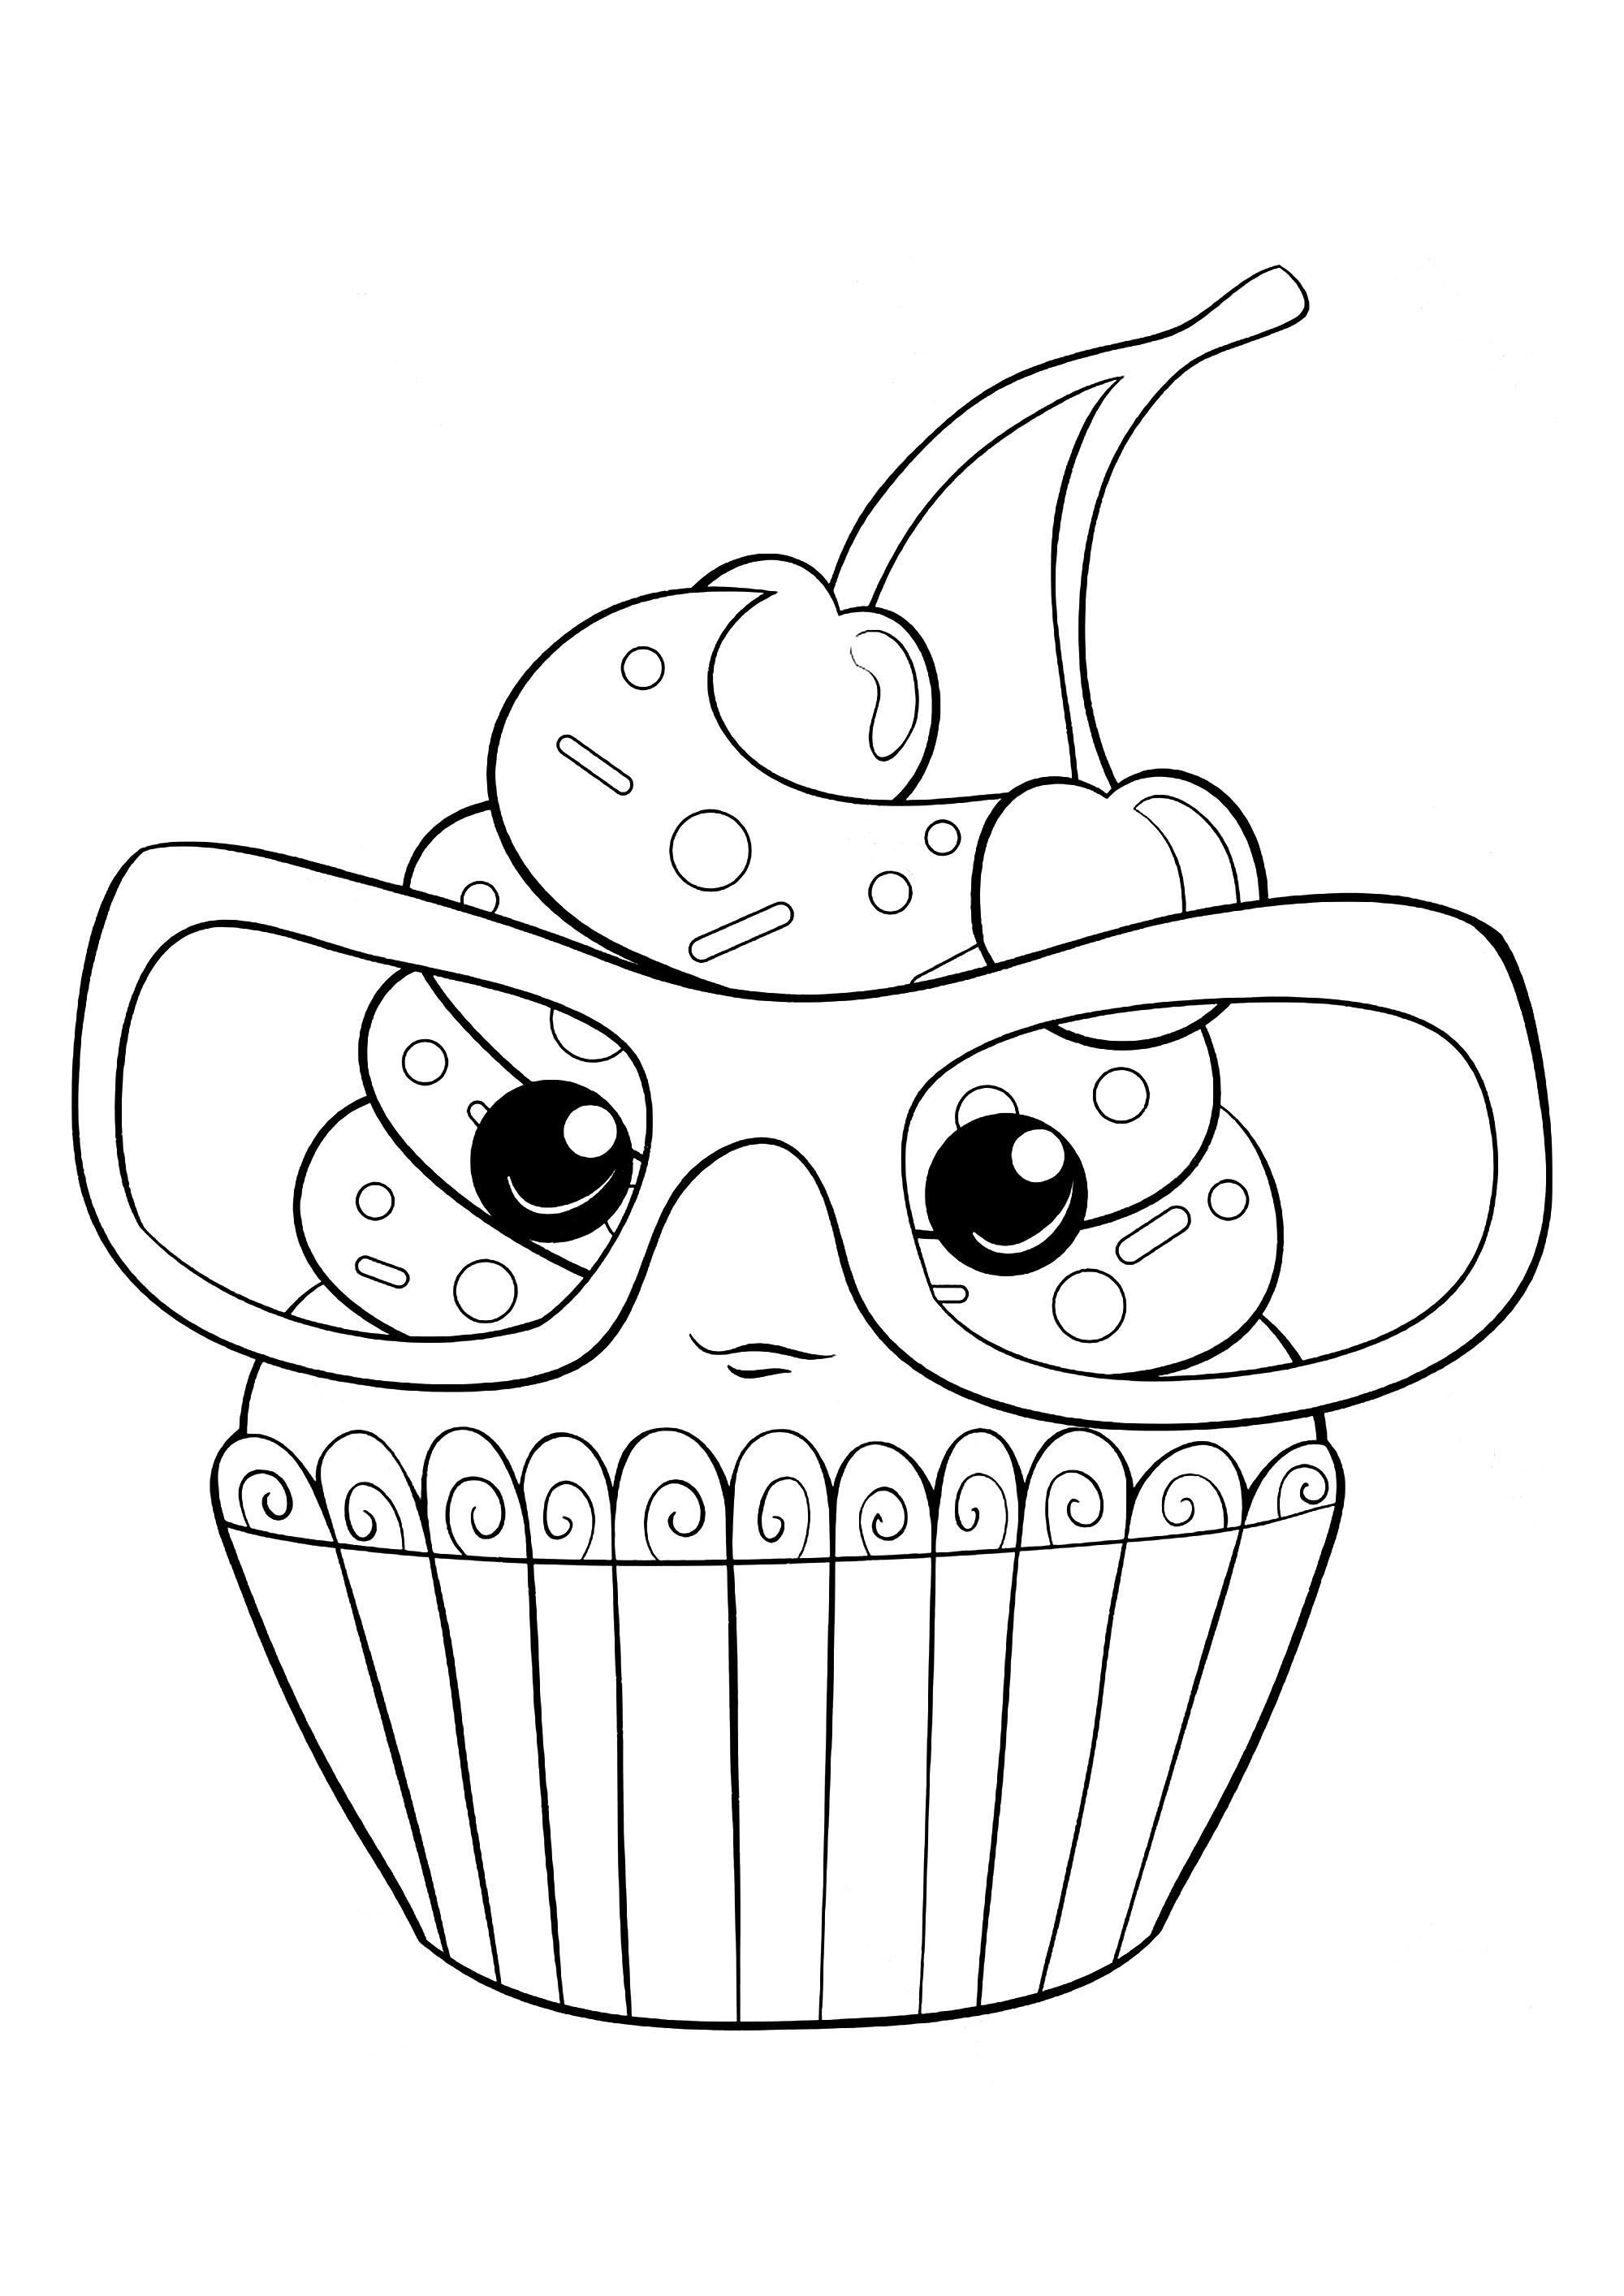 Cupcakes and cakes to download   Cupcakes And Cakes Kids Coloring ...